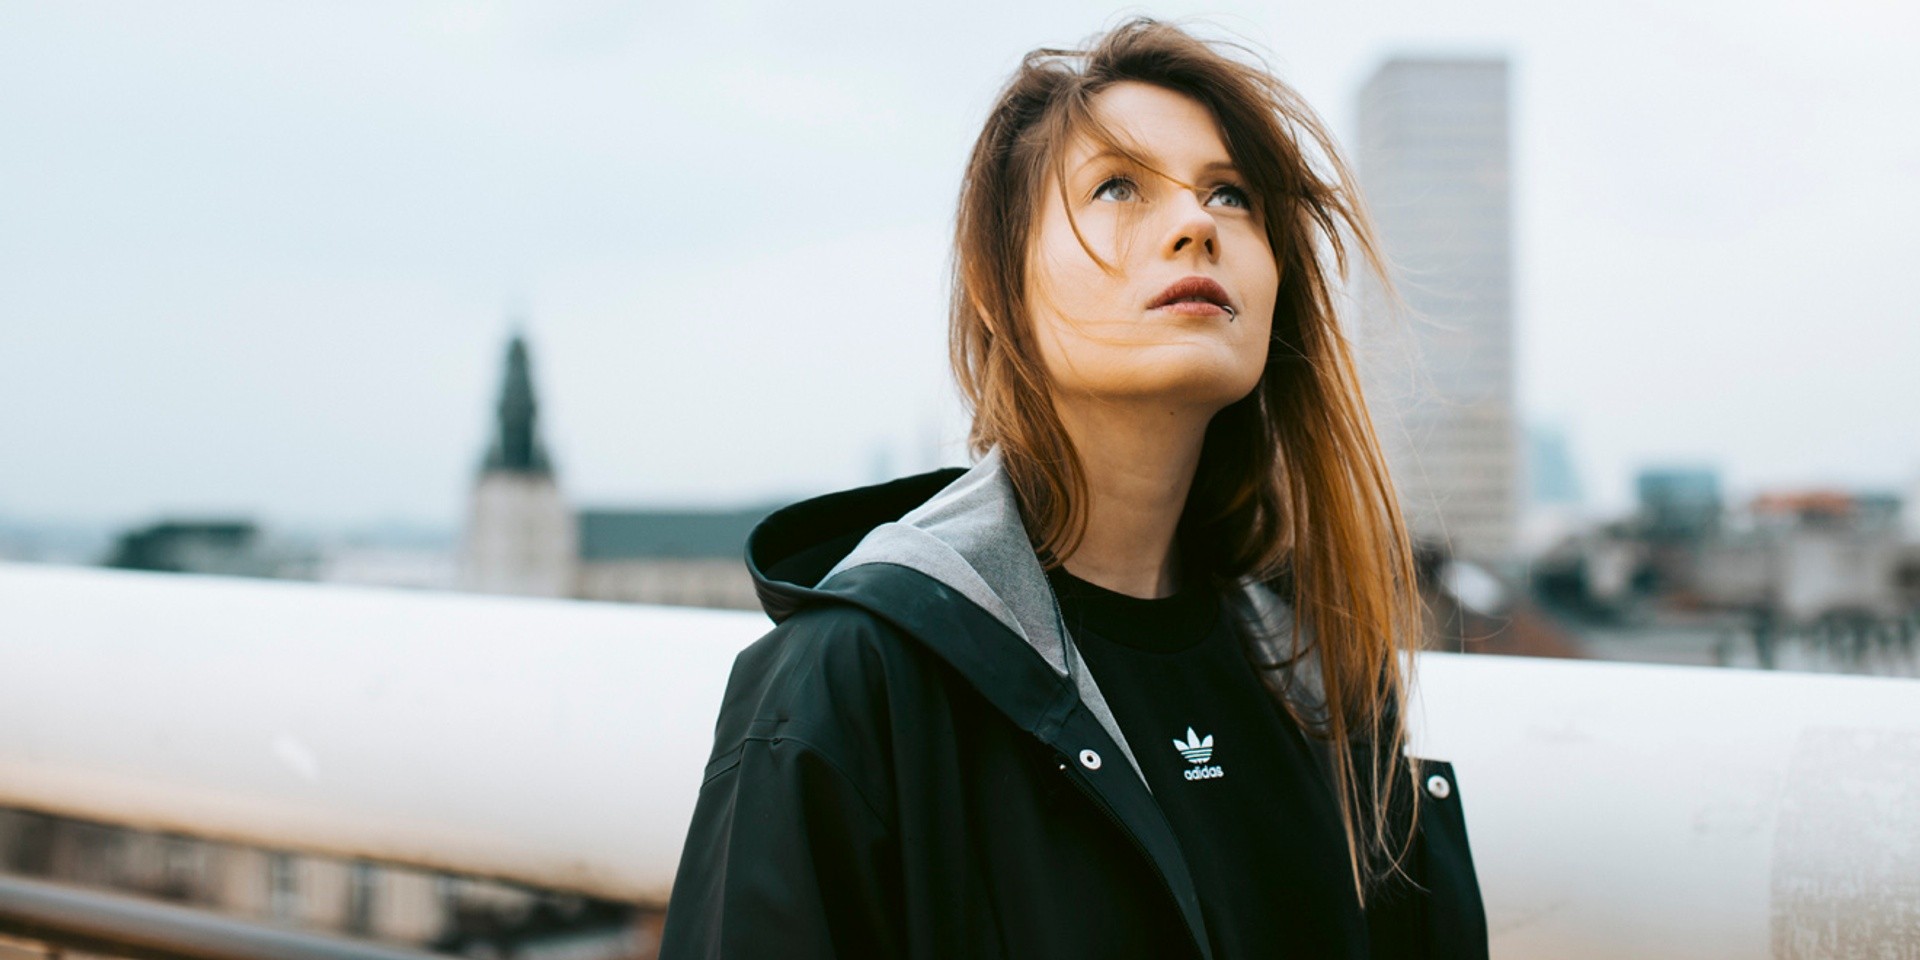 Charlotte de Witte to perform in Singapore this March 